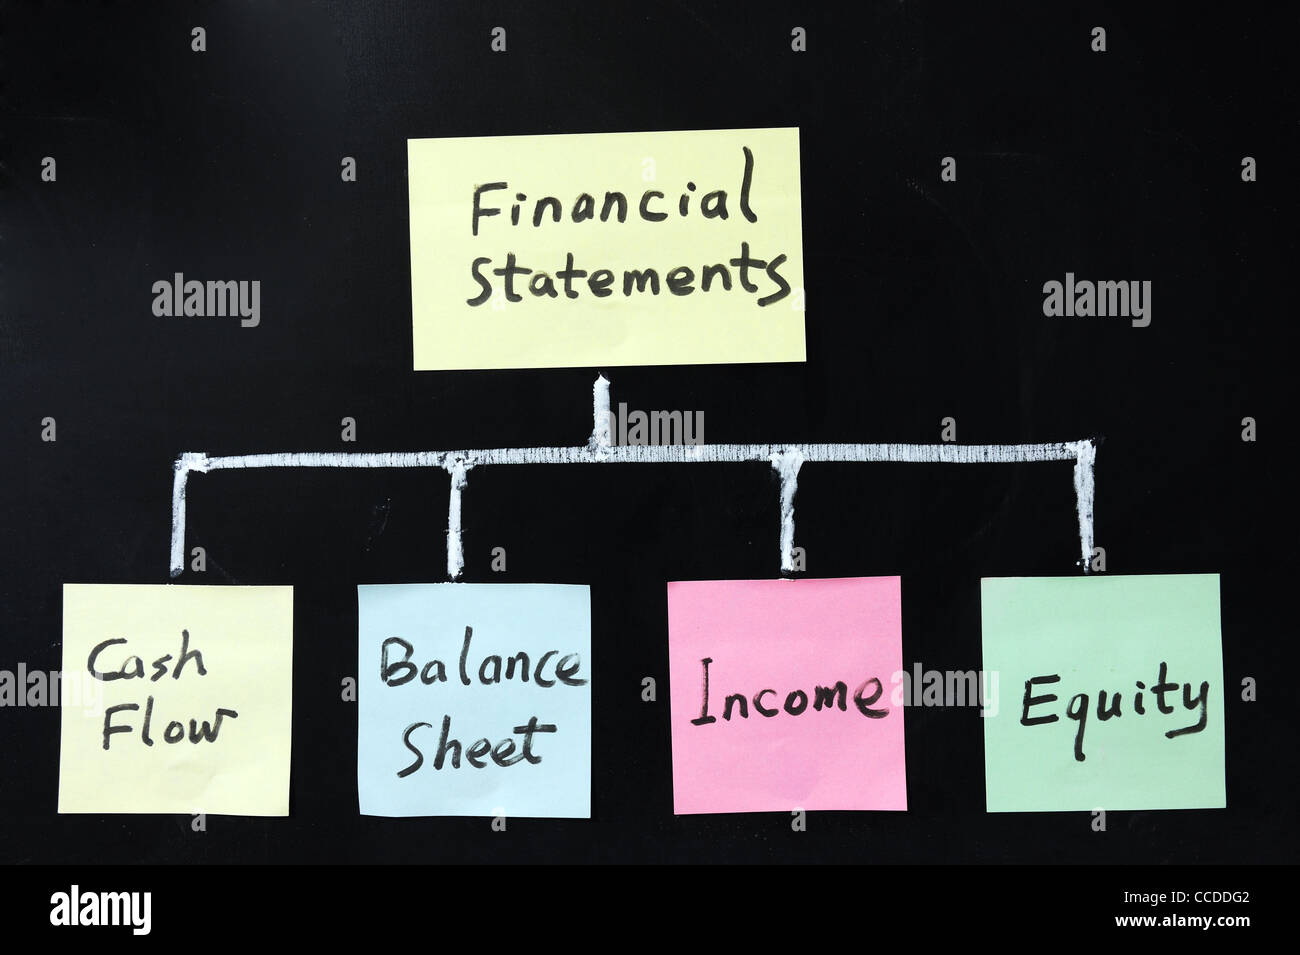 Conceptional drawing of financial statements Stock Photo